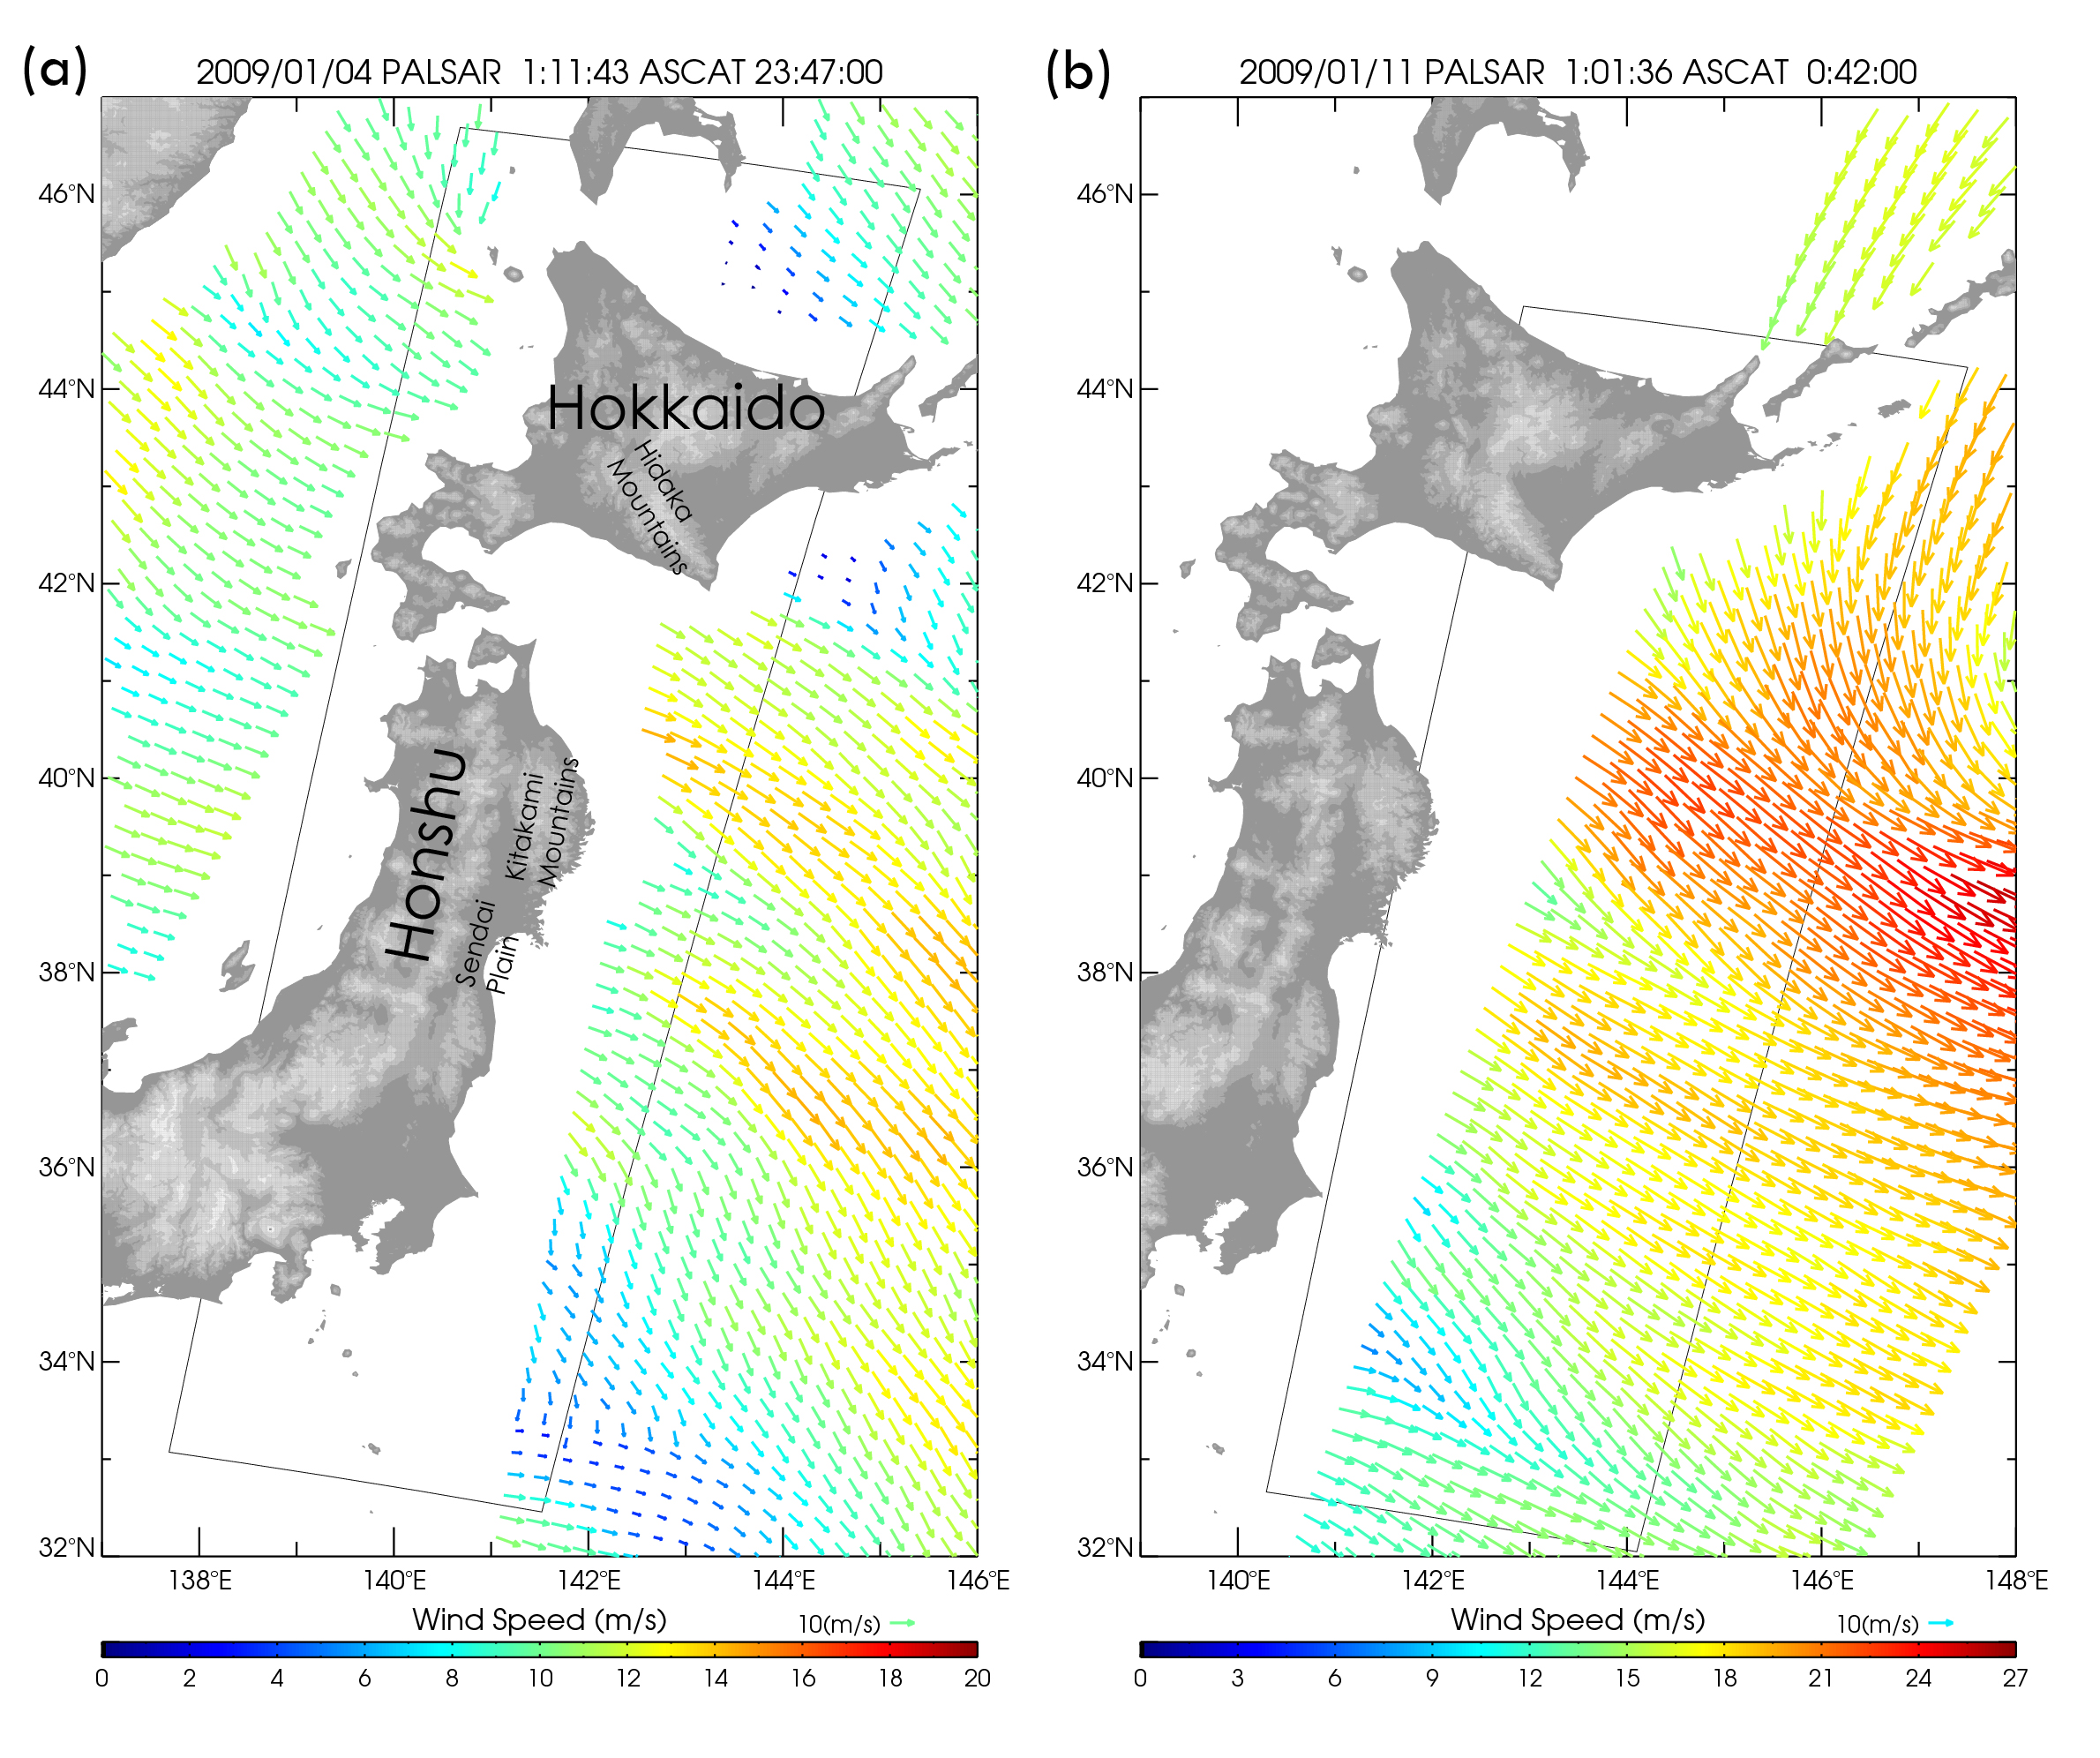 Fig.2 Ocean surface winds from MetOp/ASCAT at (a) 23:47 UTC 3 January 2009 and (b) 0:42 UTC 11 January 2009. Black frames indicate the PALSAR observation areas shown in Fig. 1.